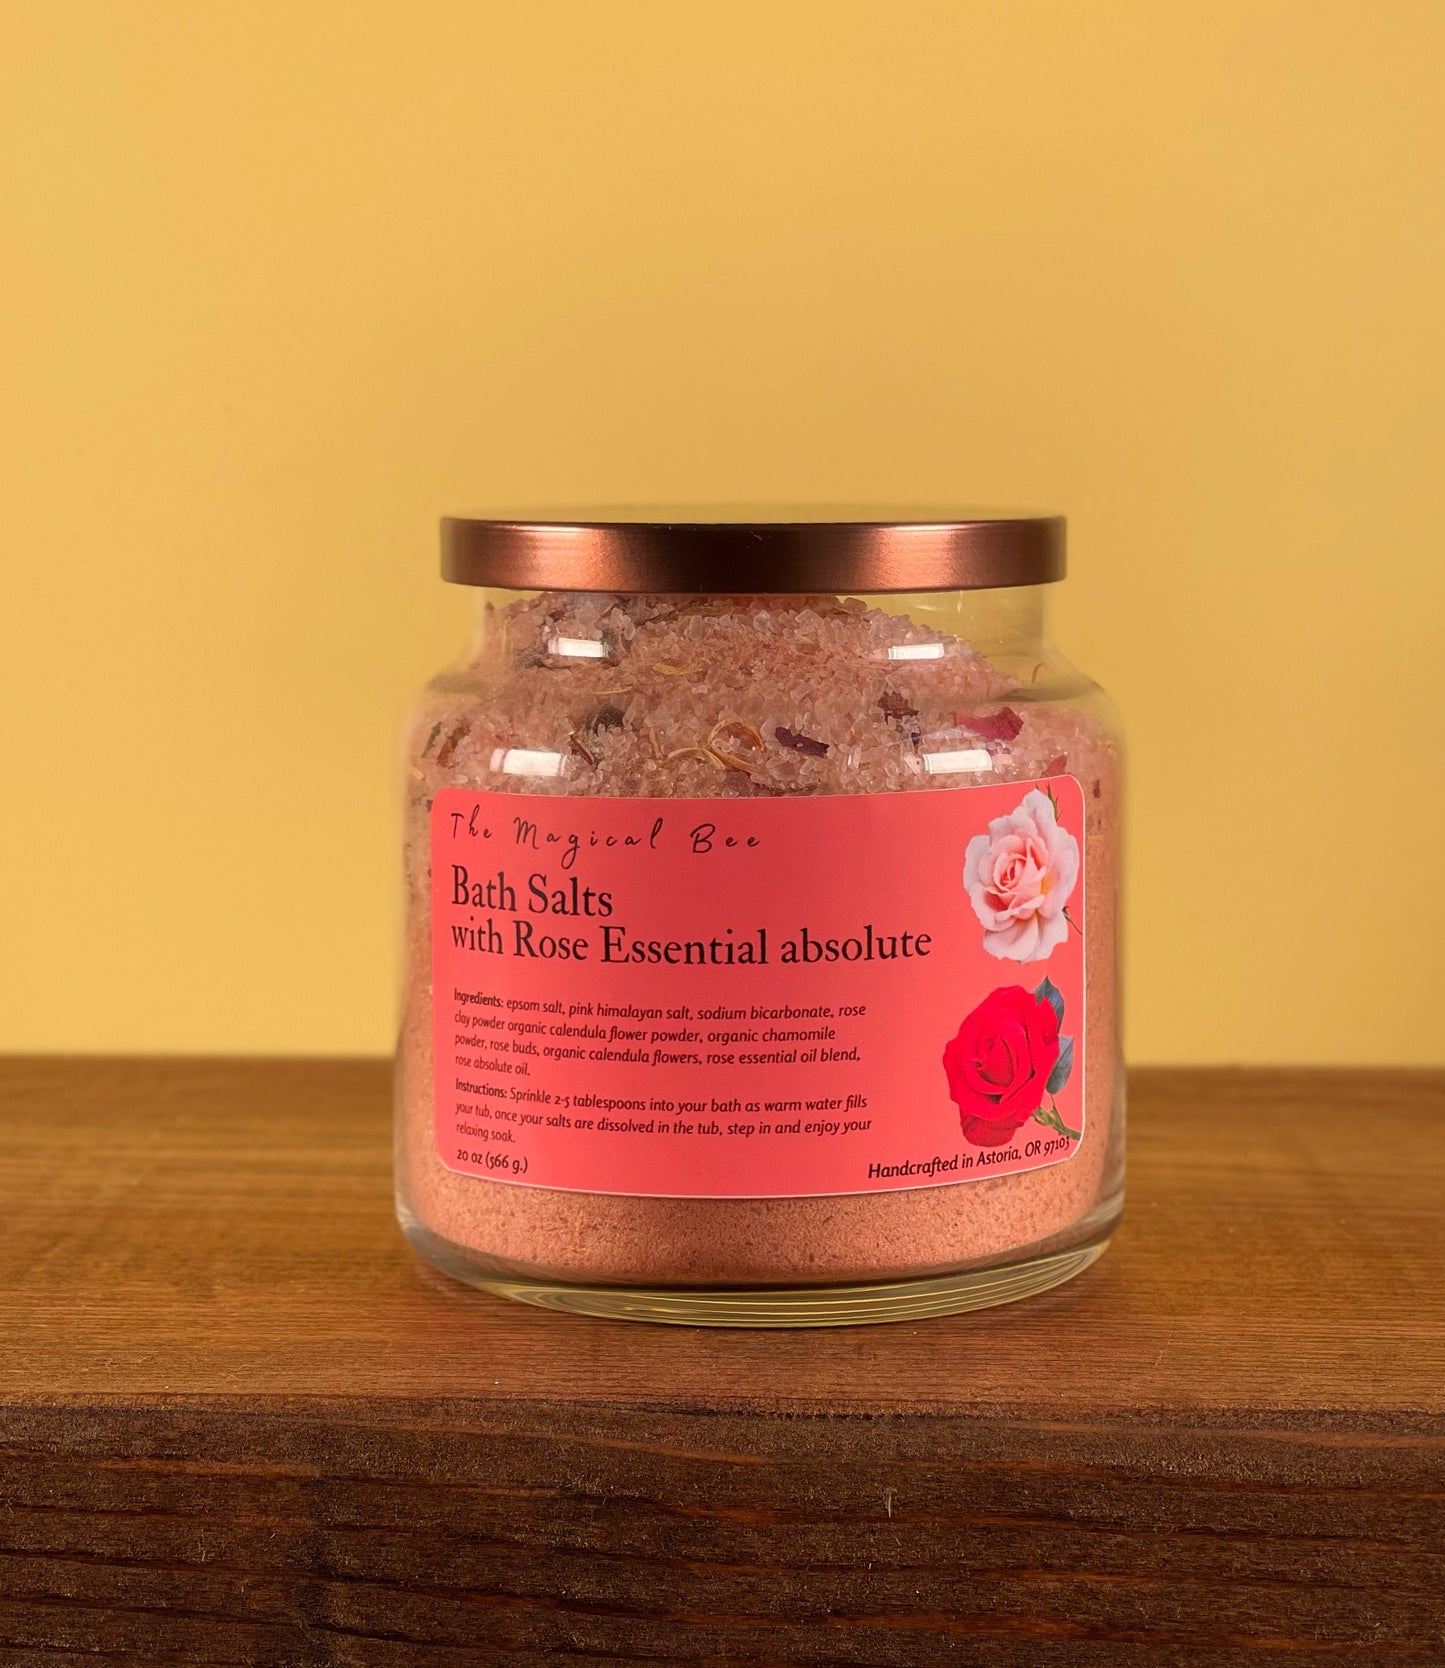 Bath Salts with Rose Essential absolute oil